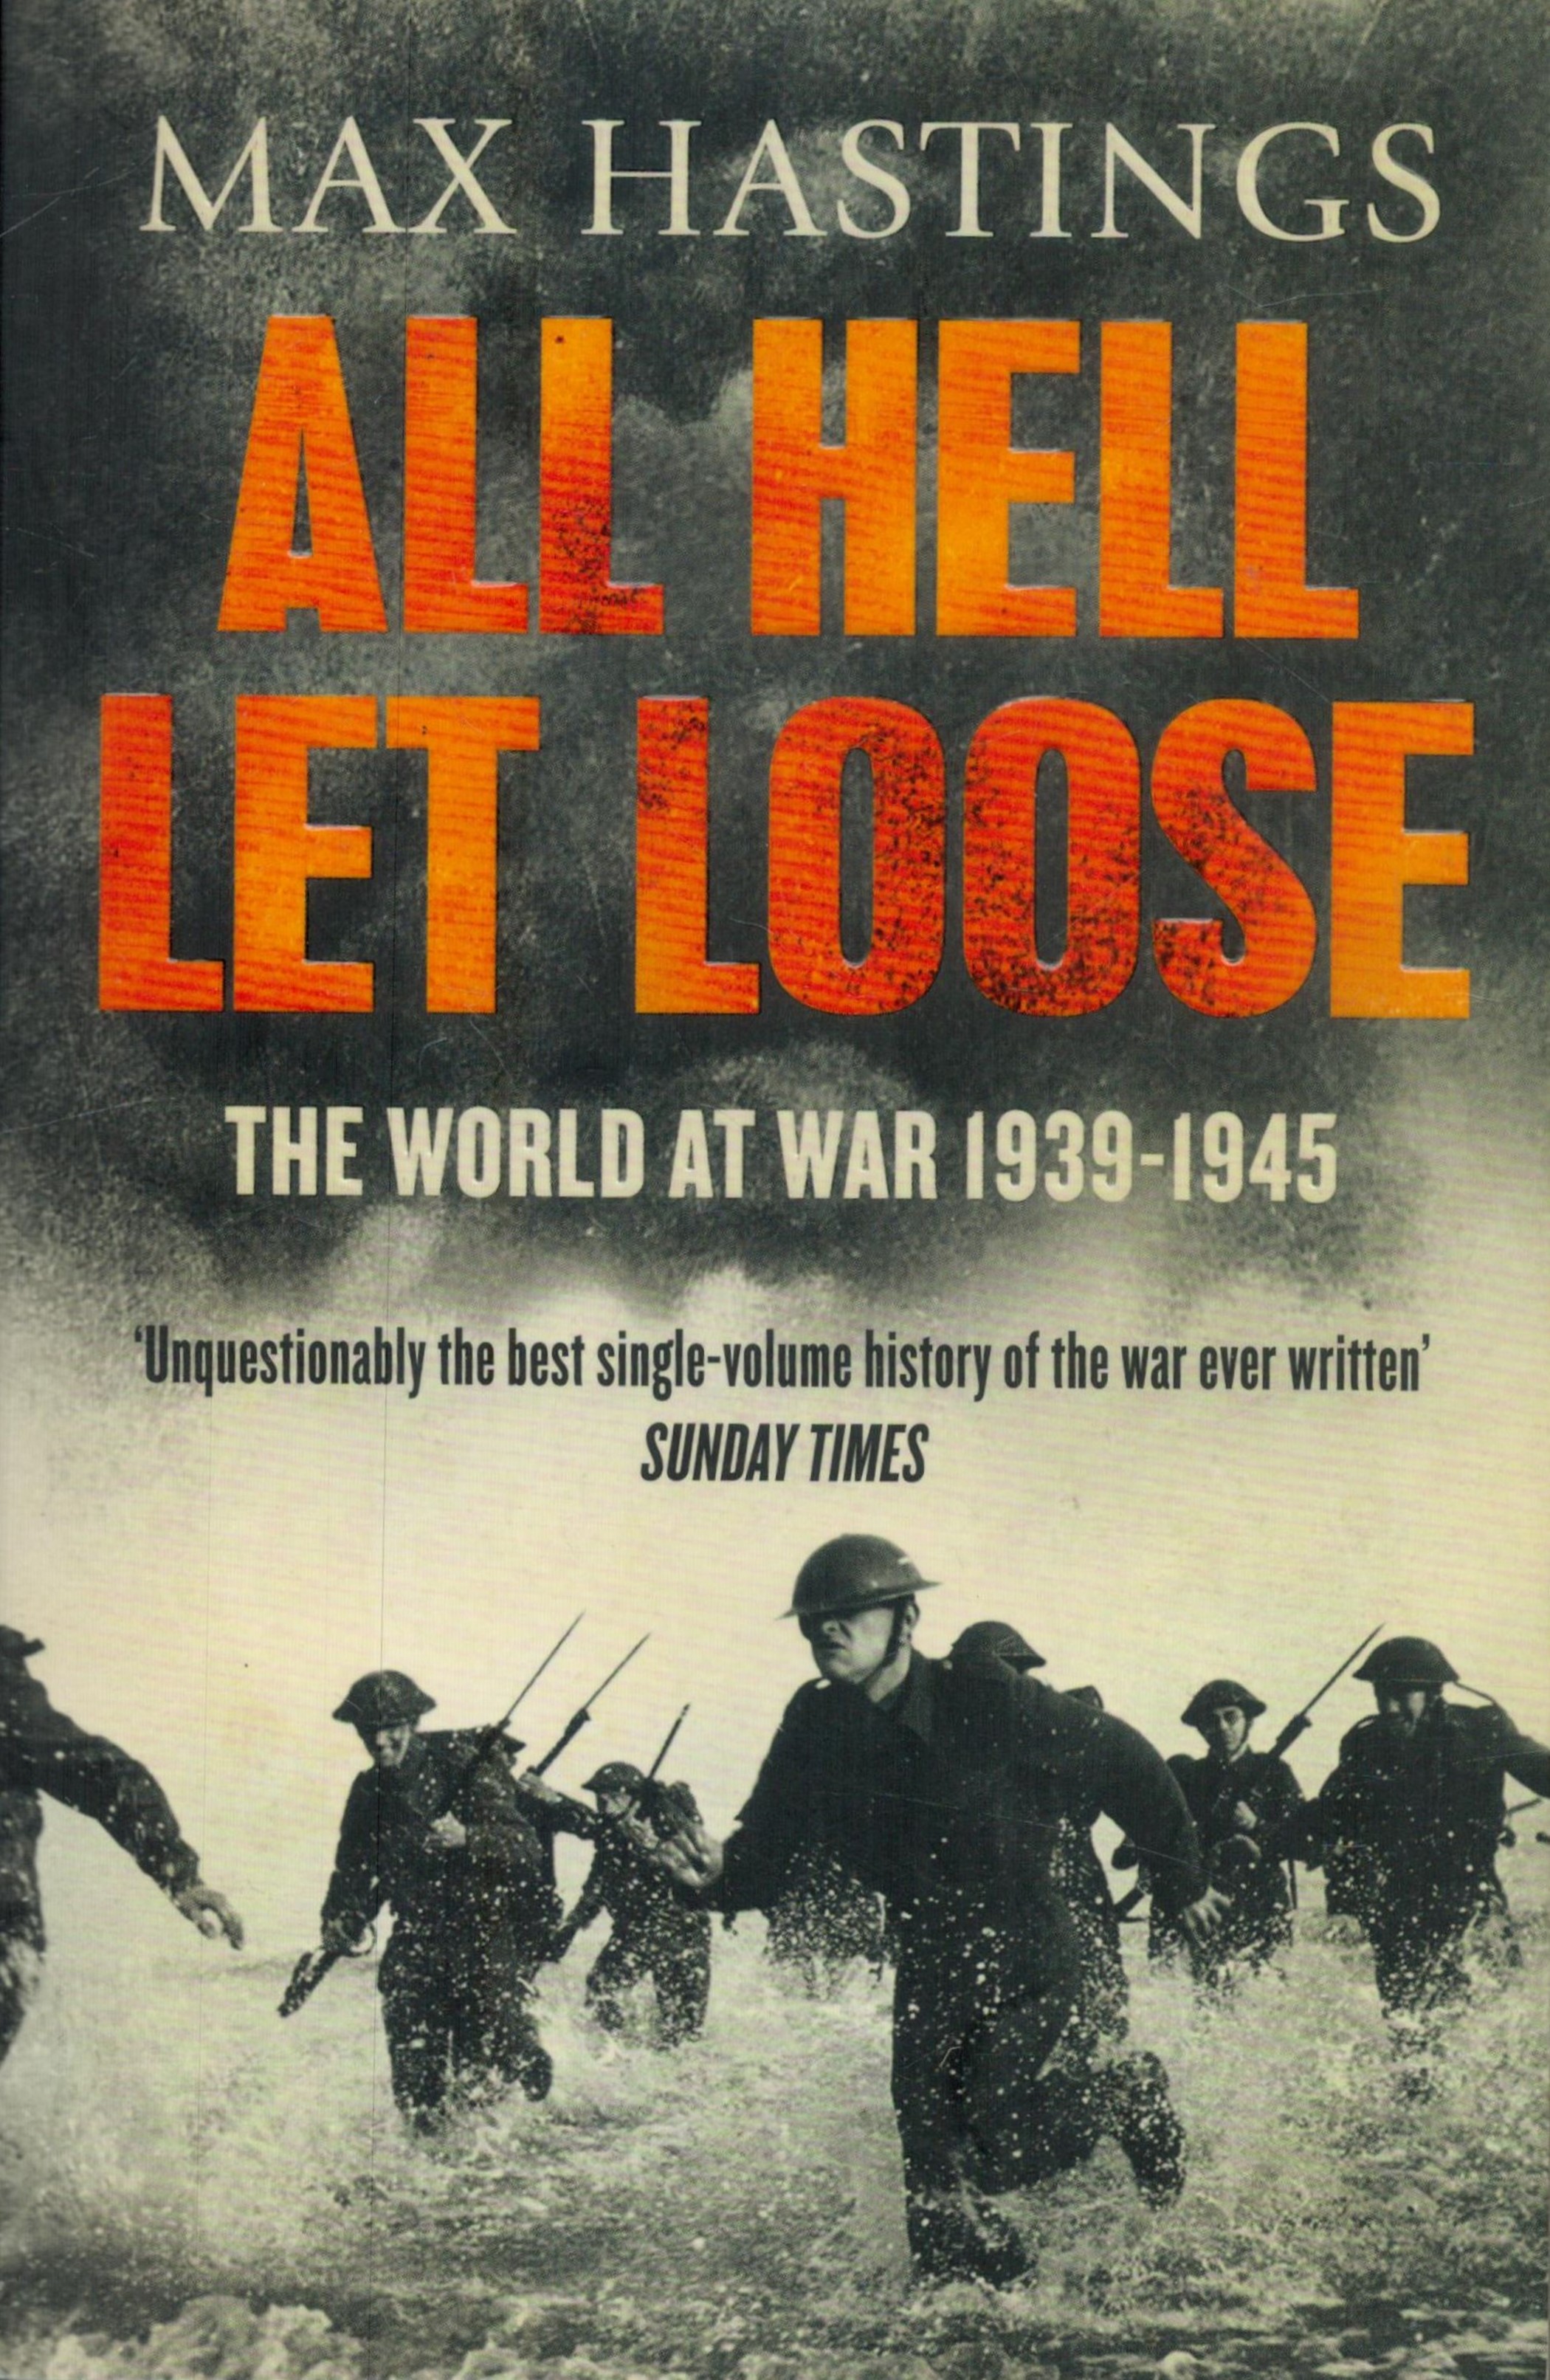 All Hell Let Loose - The World at War 1939-1945 by Max Hastings 2012 Softback Book with 748 pages - Image 3 of 9